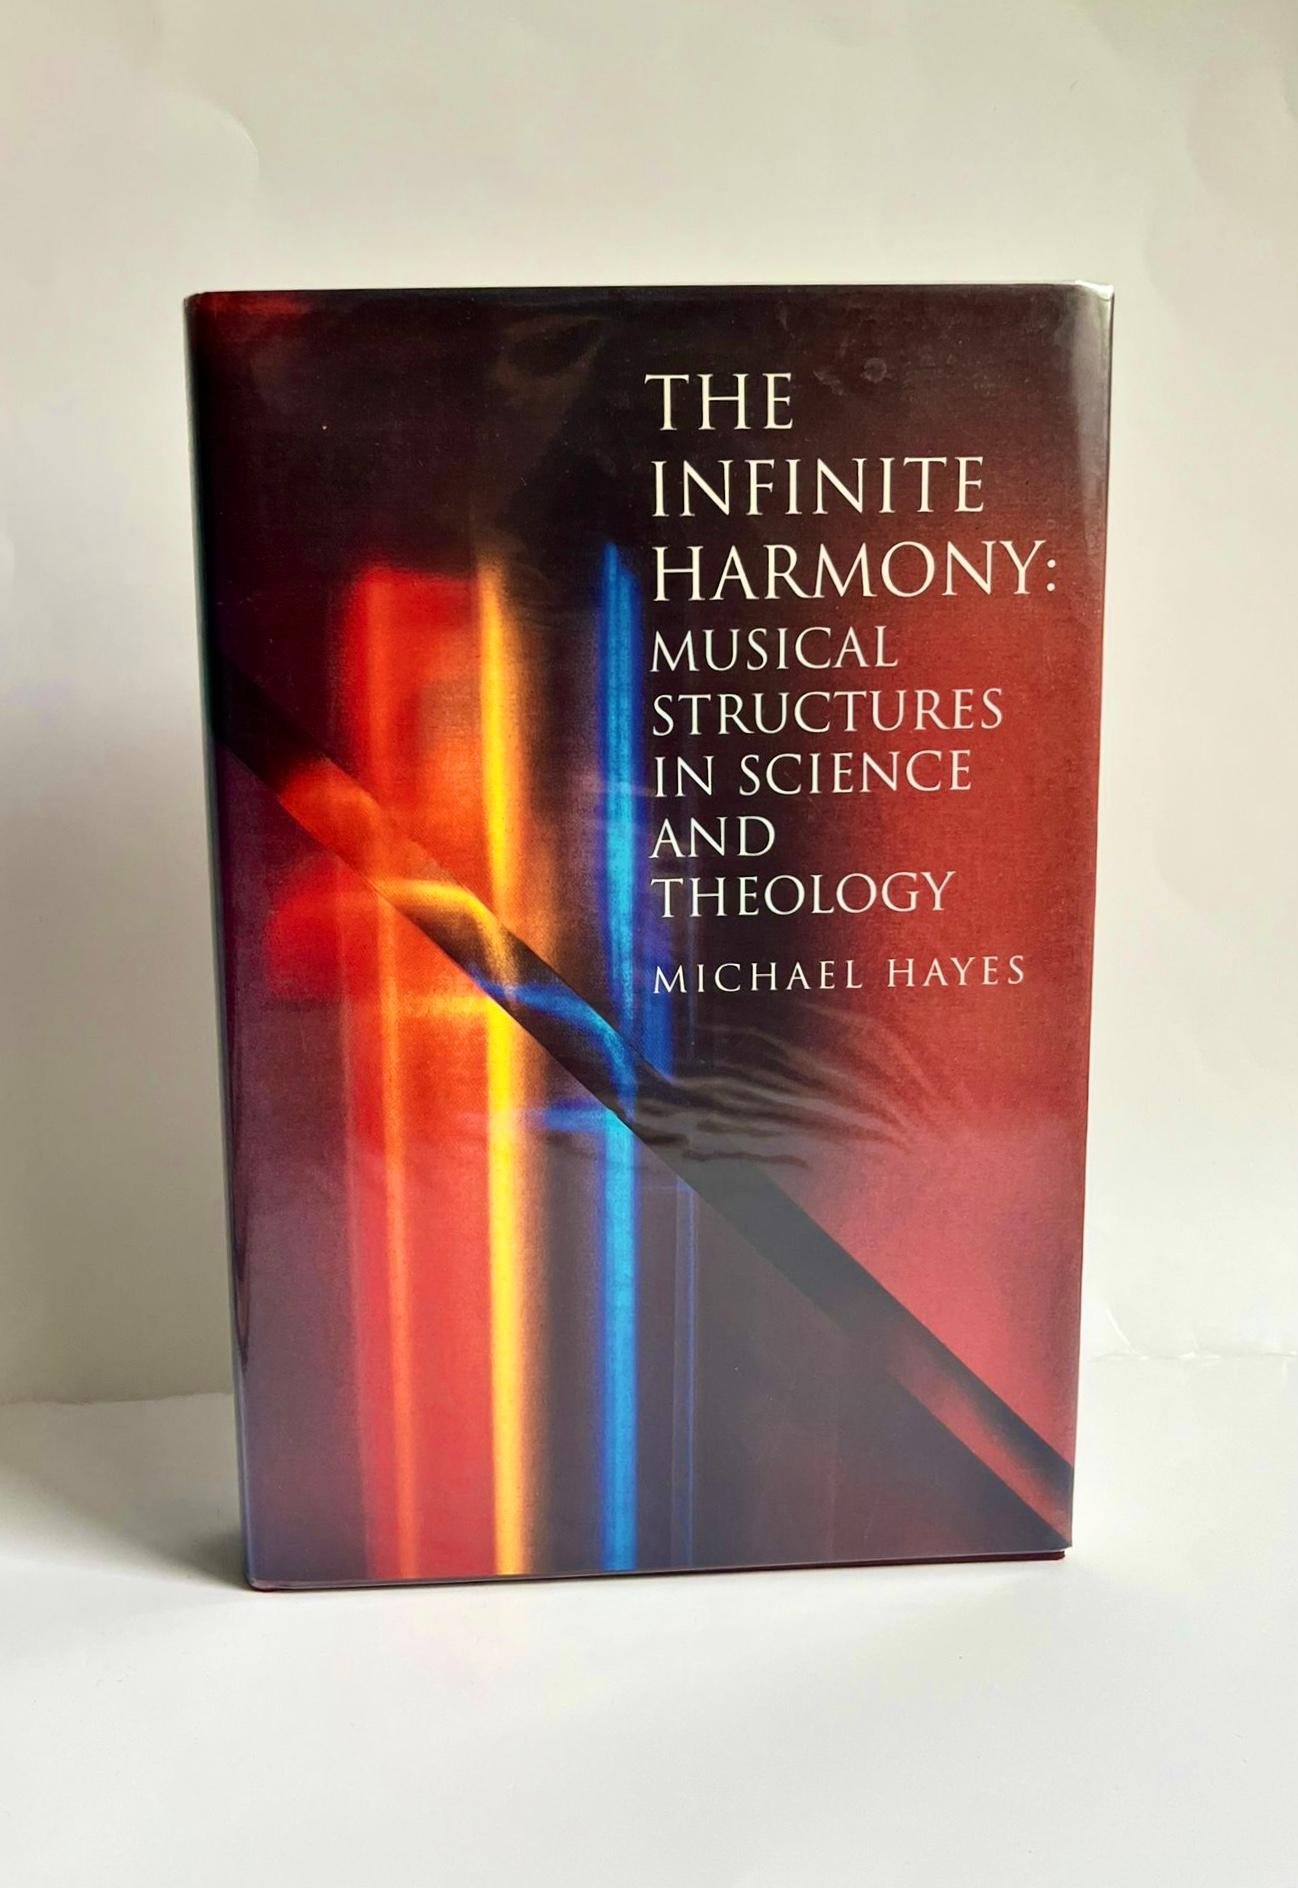 The Infinite Harmony: Musical Structures In Science & Theology by Michael Hayes